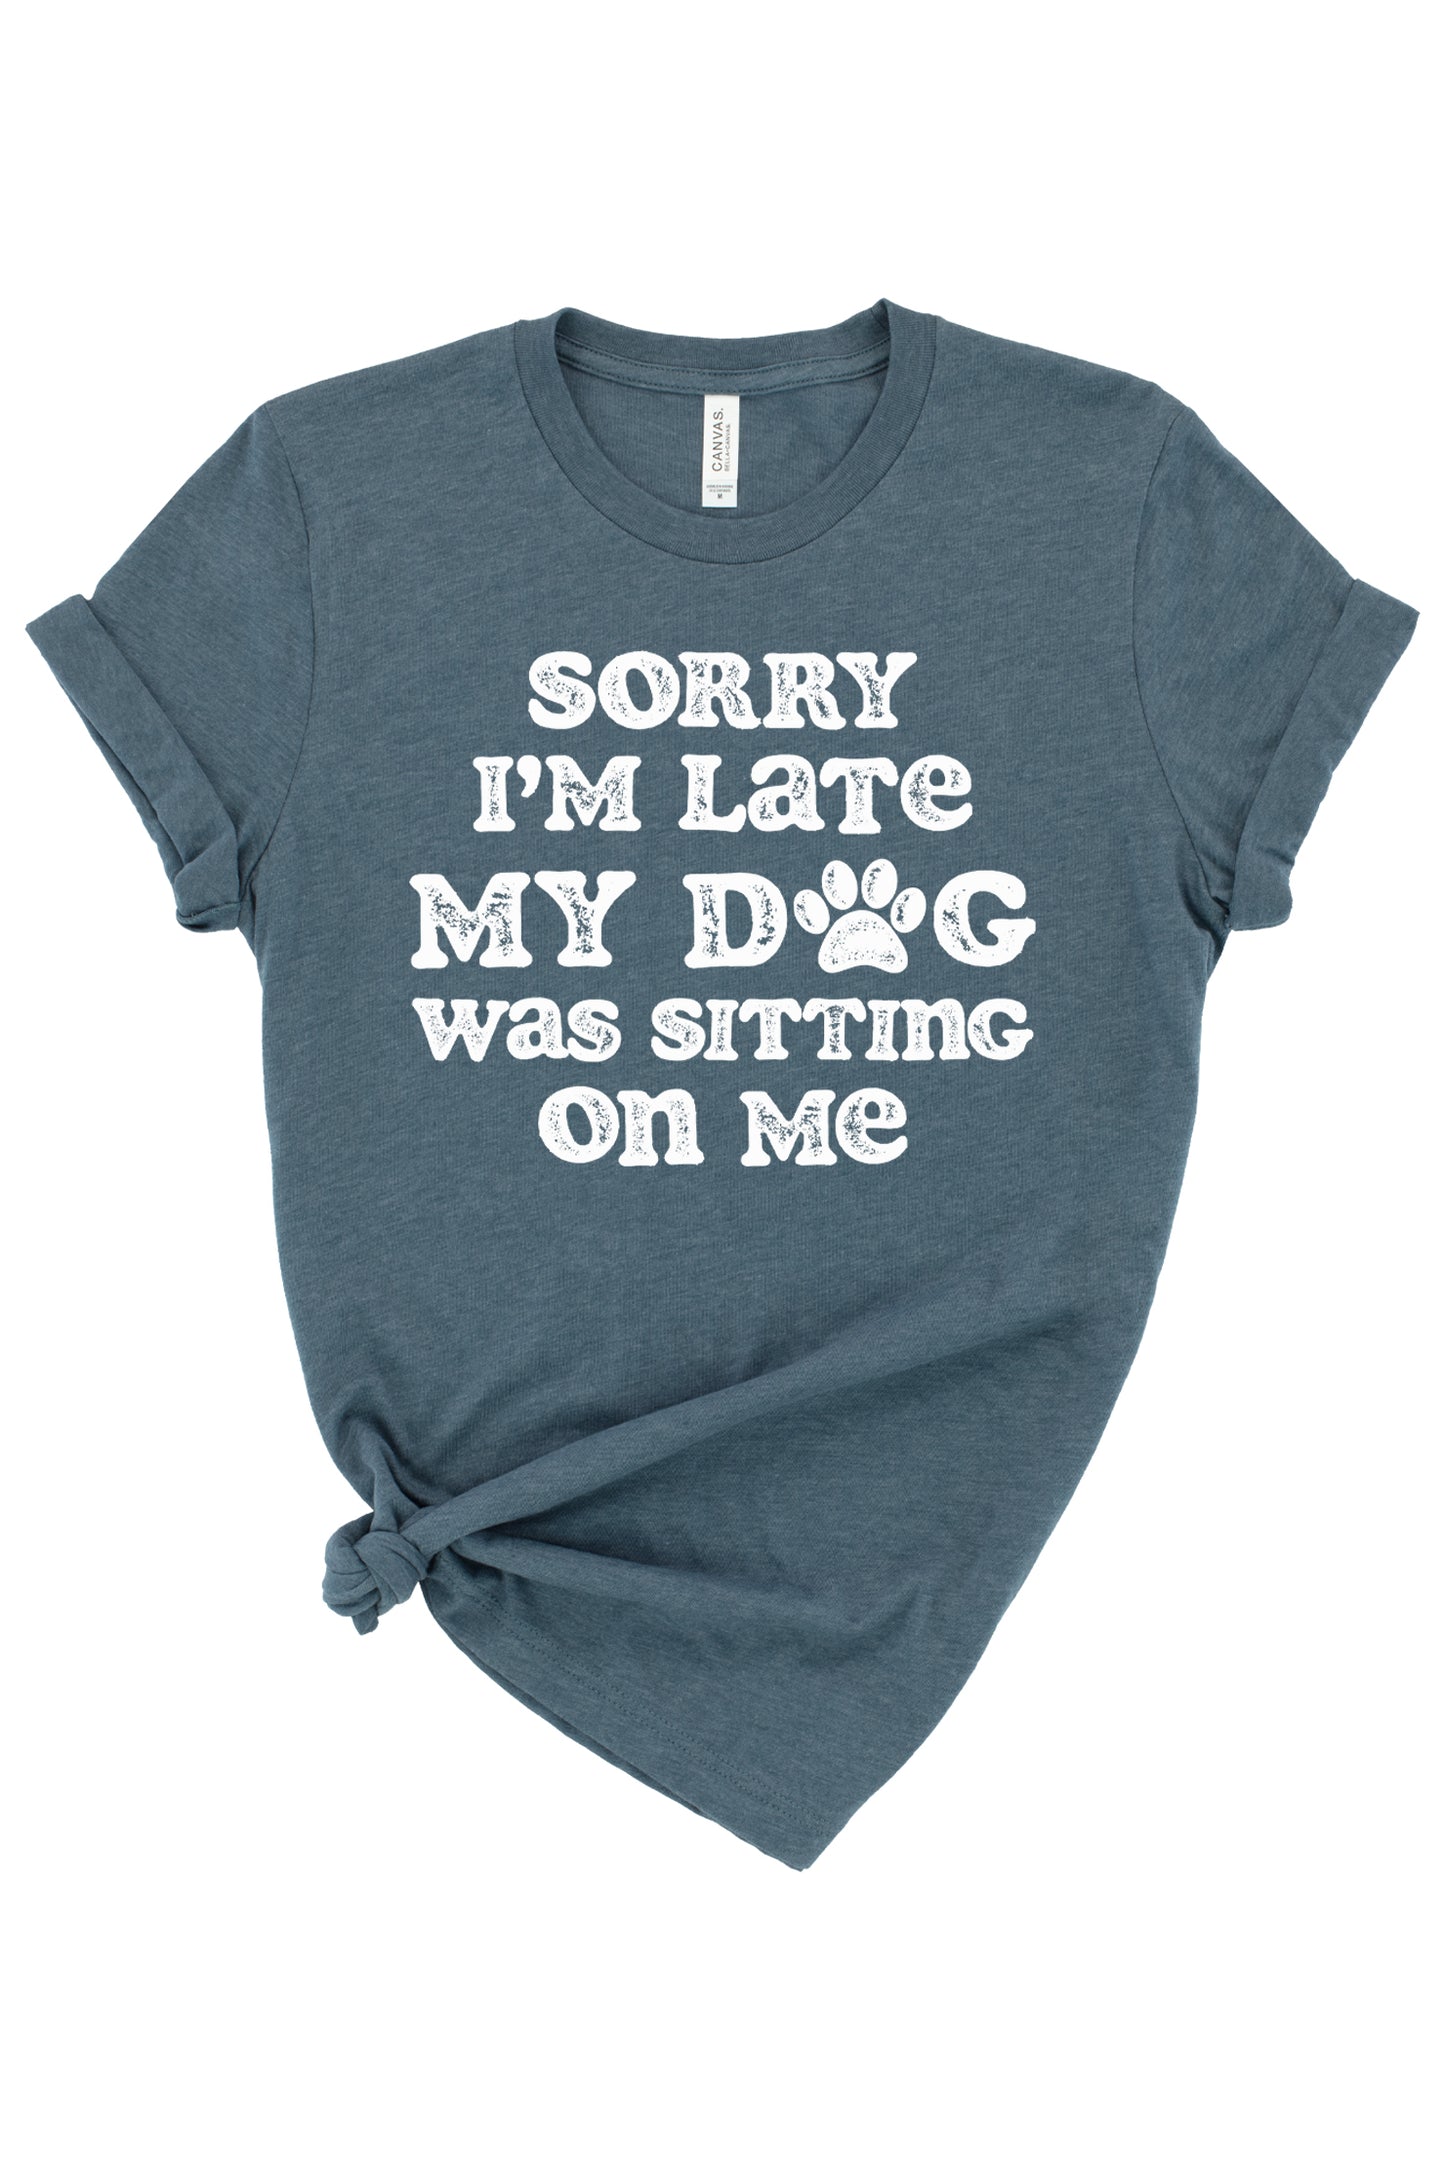 My Dog Was Sitting On Me Graphic Tee